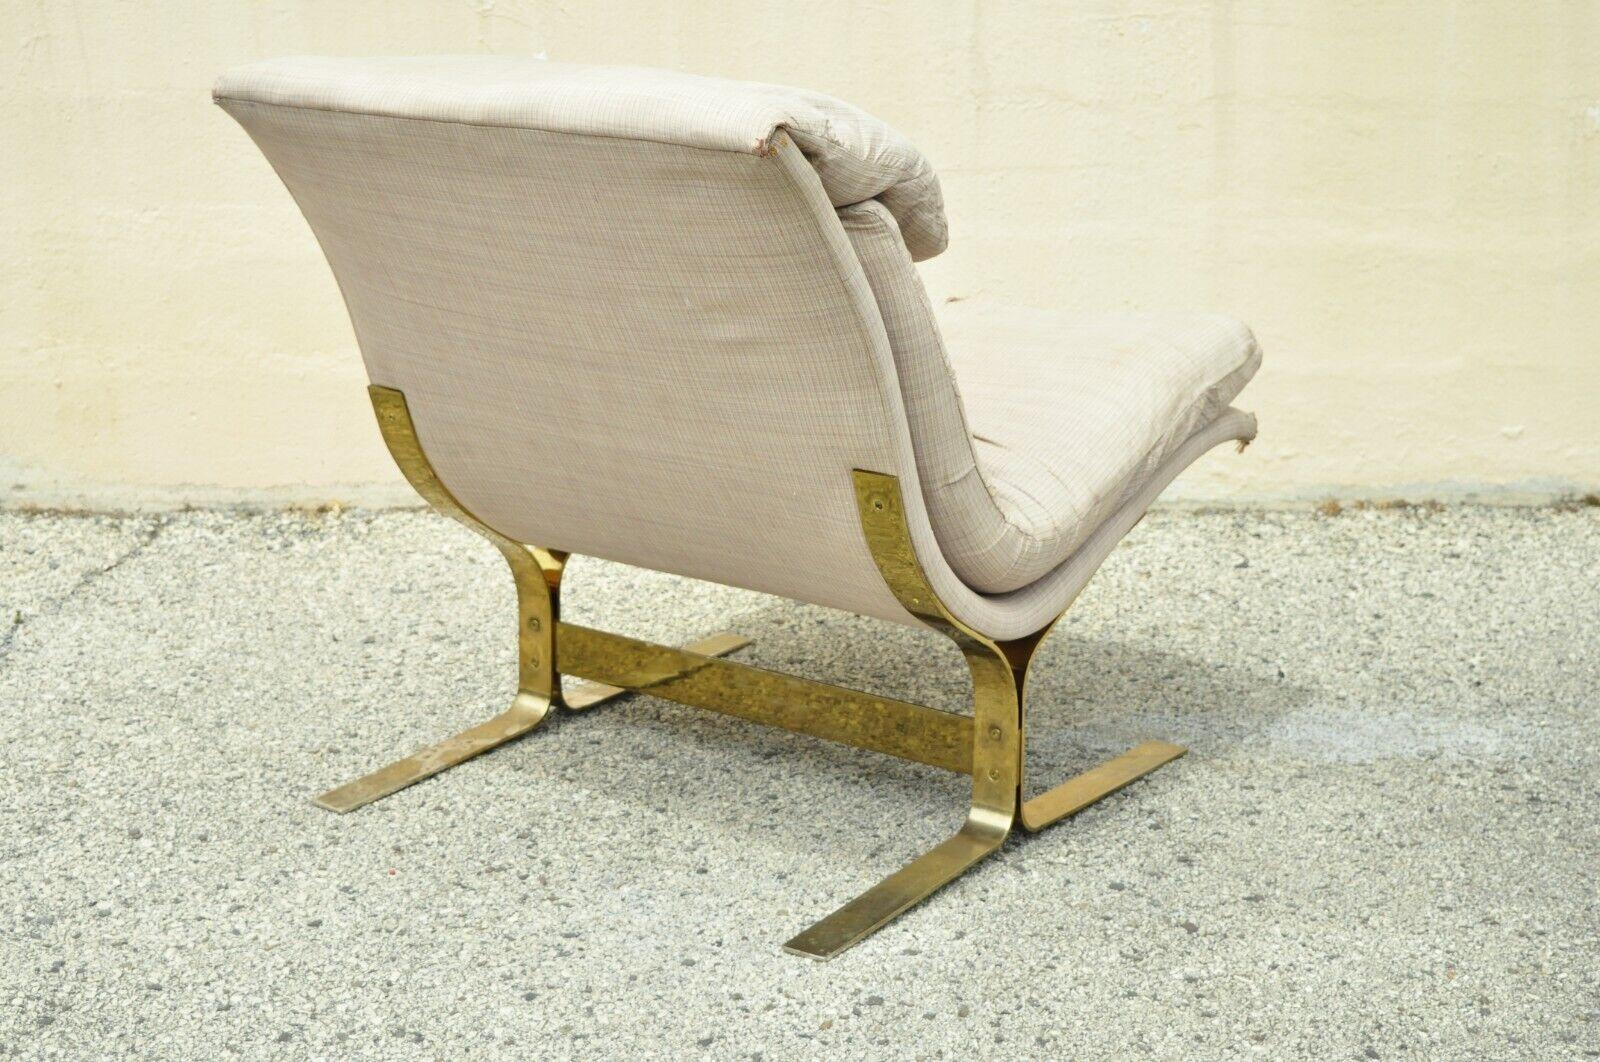 Mid-century Milo Baughman style brass cantilever slipper lounge chair. Item features a brass plated metal cantilever frame, nice wide seat, clean modernist lines, great style and form. Circa Mid to Late 20th Century. Measurements: 32